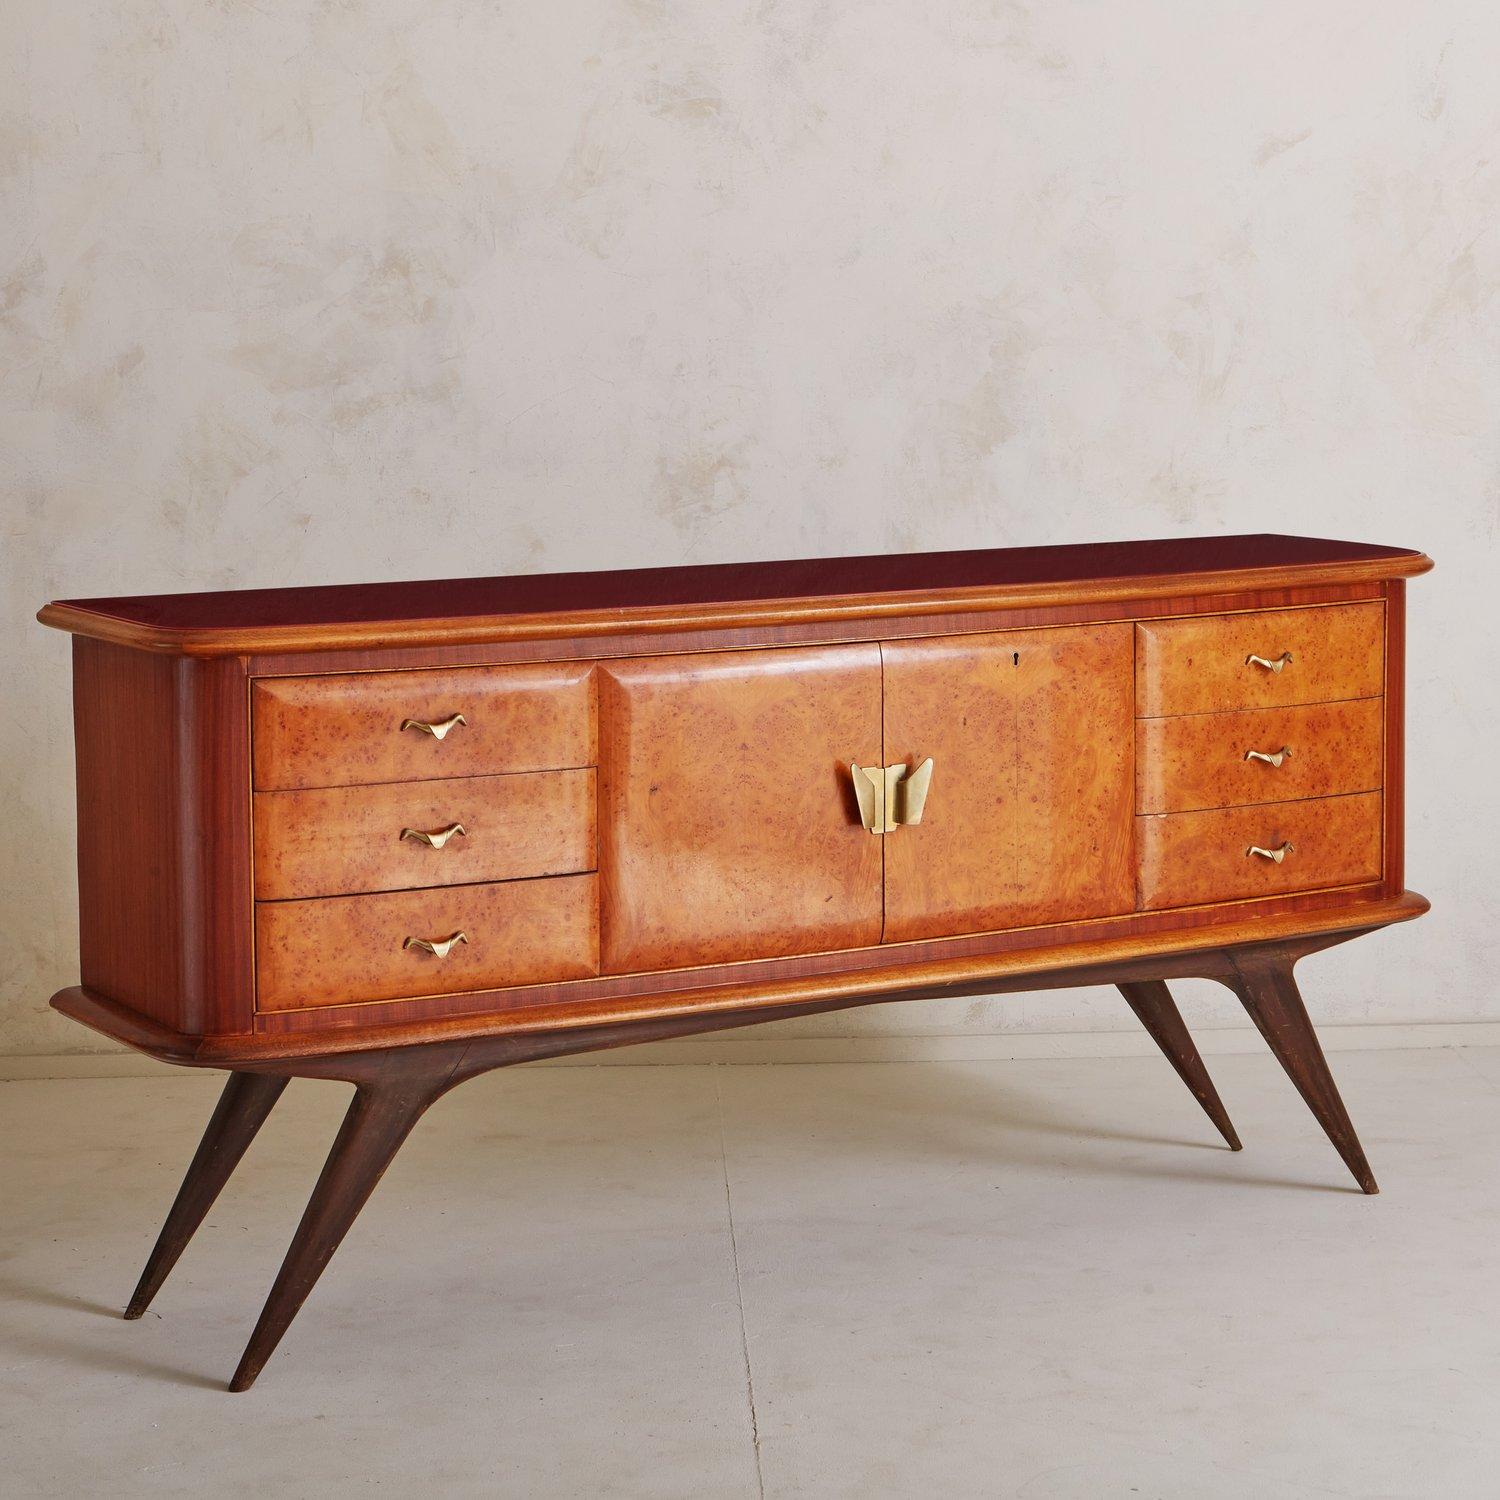 A stunning Italian mahogany and burlwood credenza with a vibrant red glass top. This piece has six drawers and two center doors which open to reveal an antiqued mirror interior and one shelf. It has beautiful patinated brass hardware and stands on